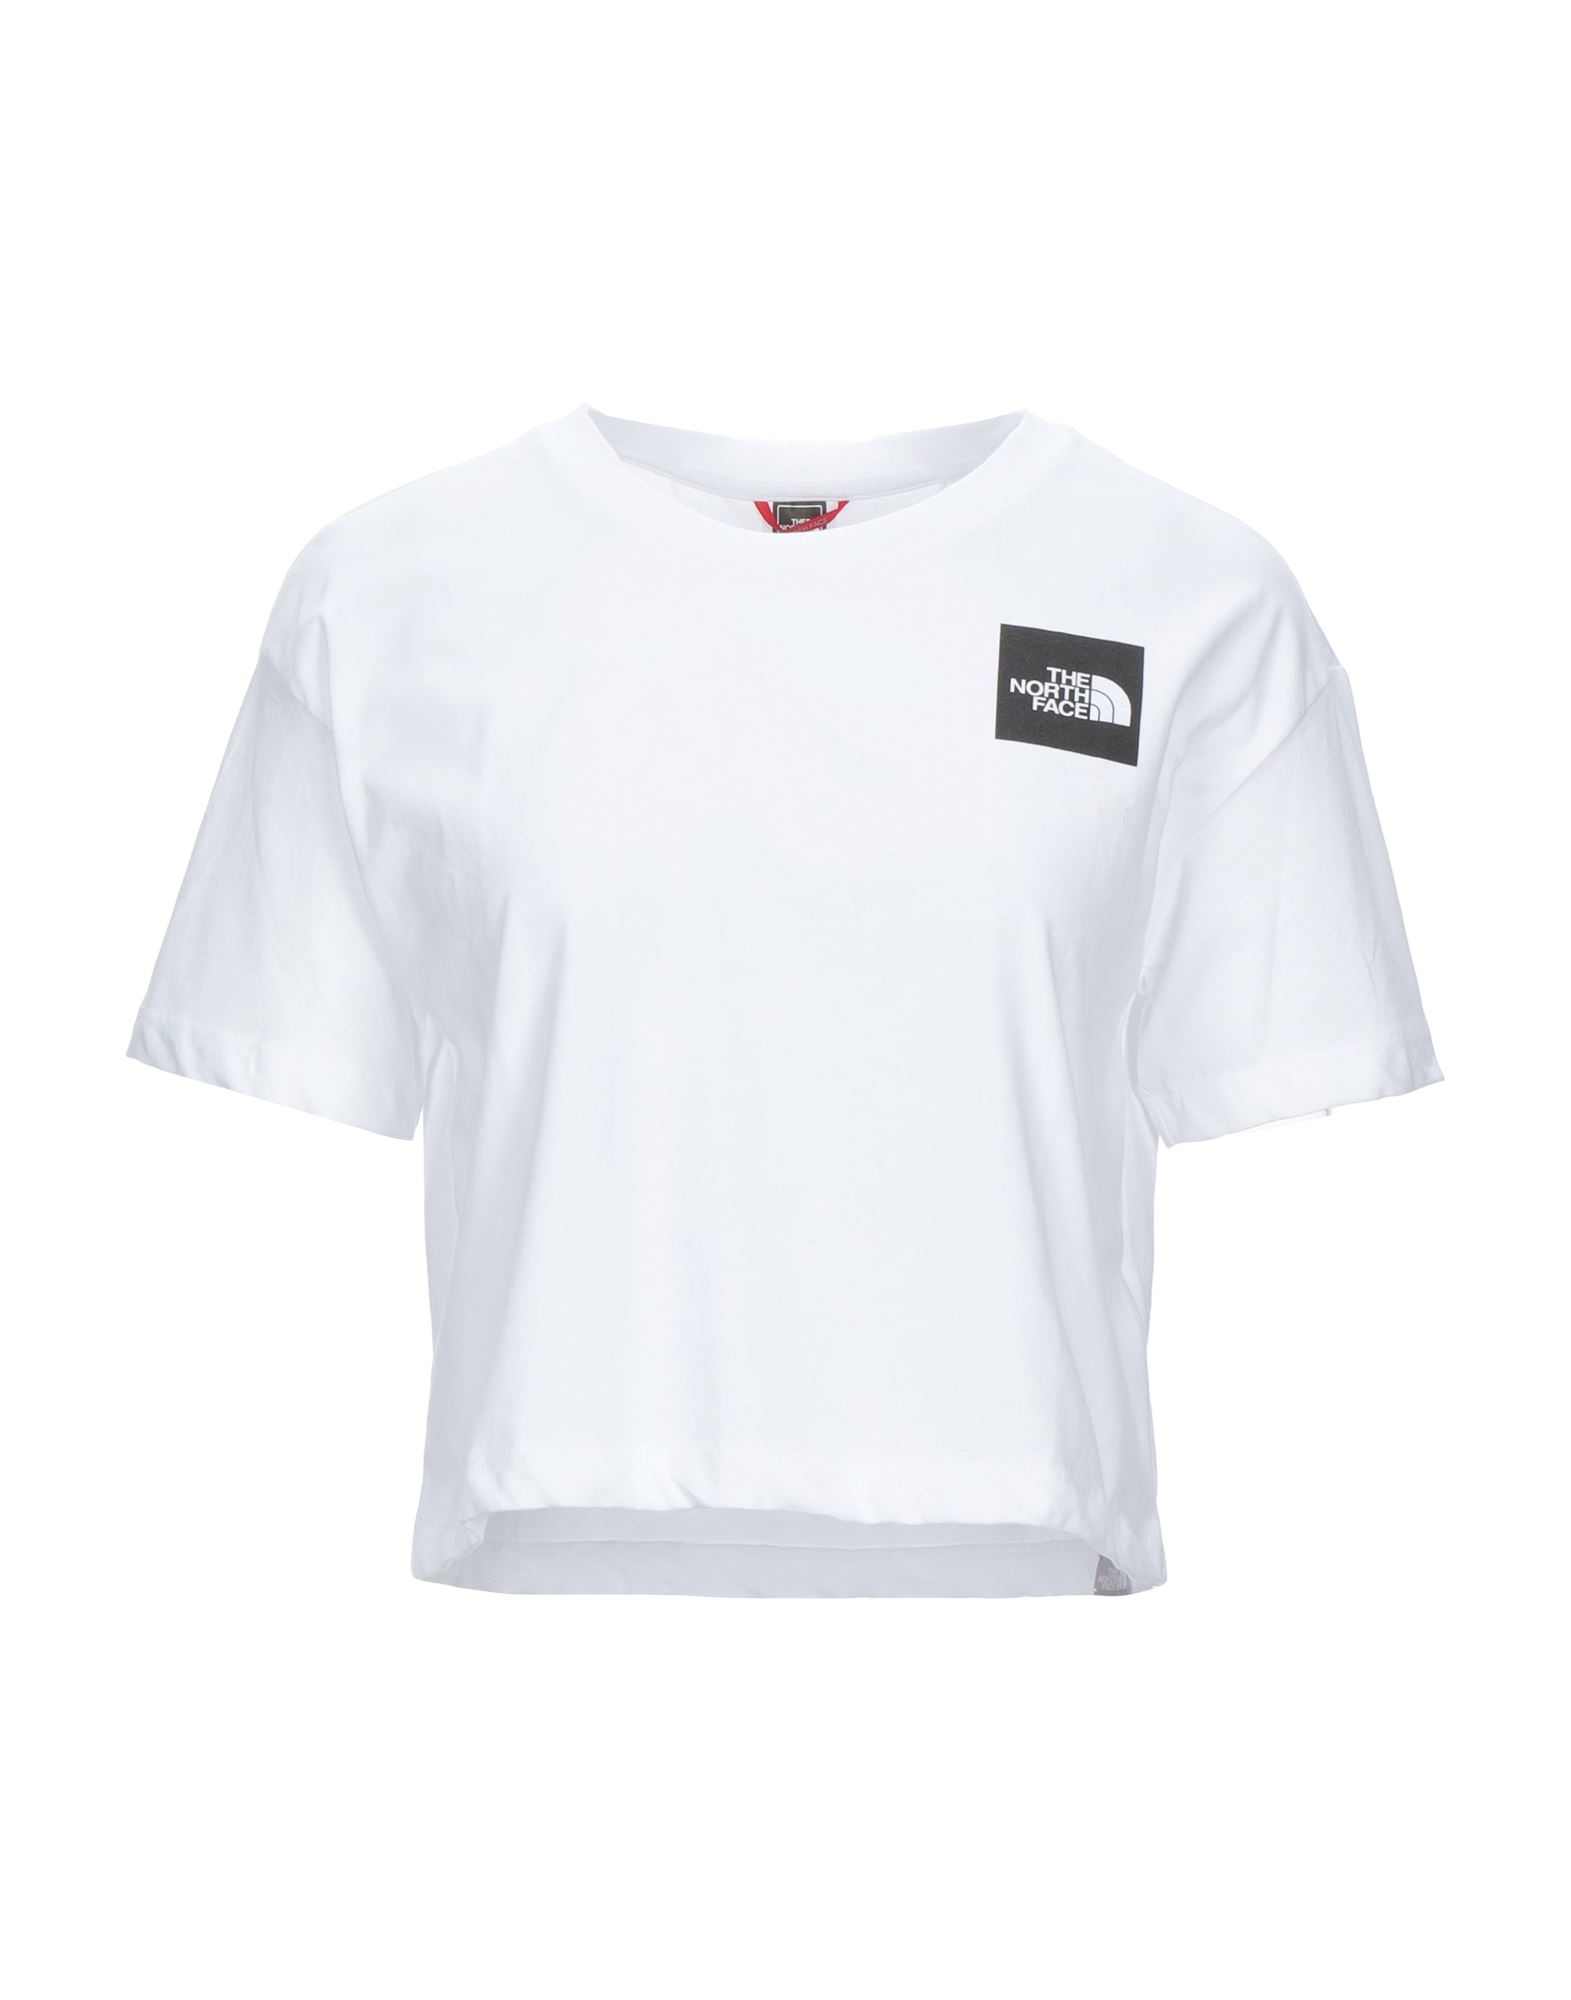 THE NORTH FACE T-shirts - Item 12528017